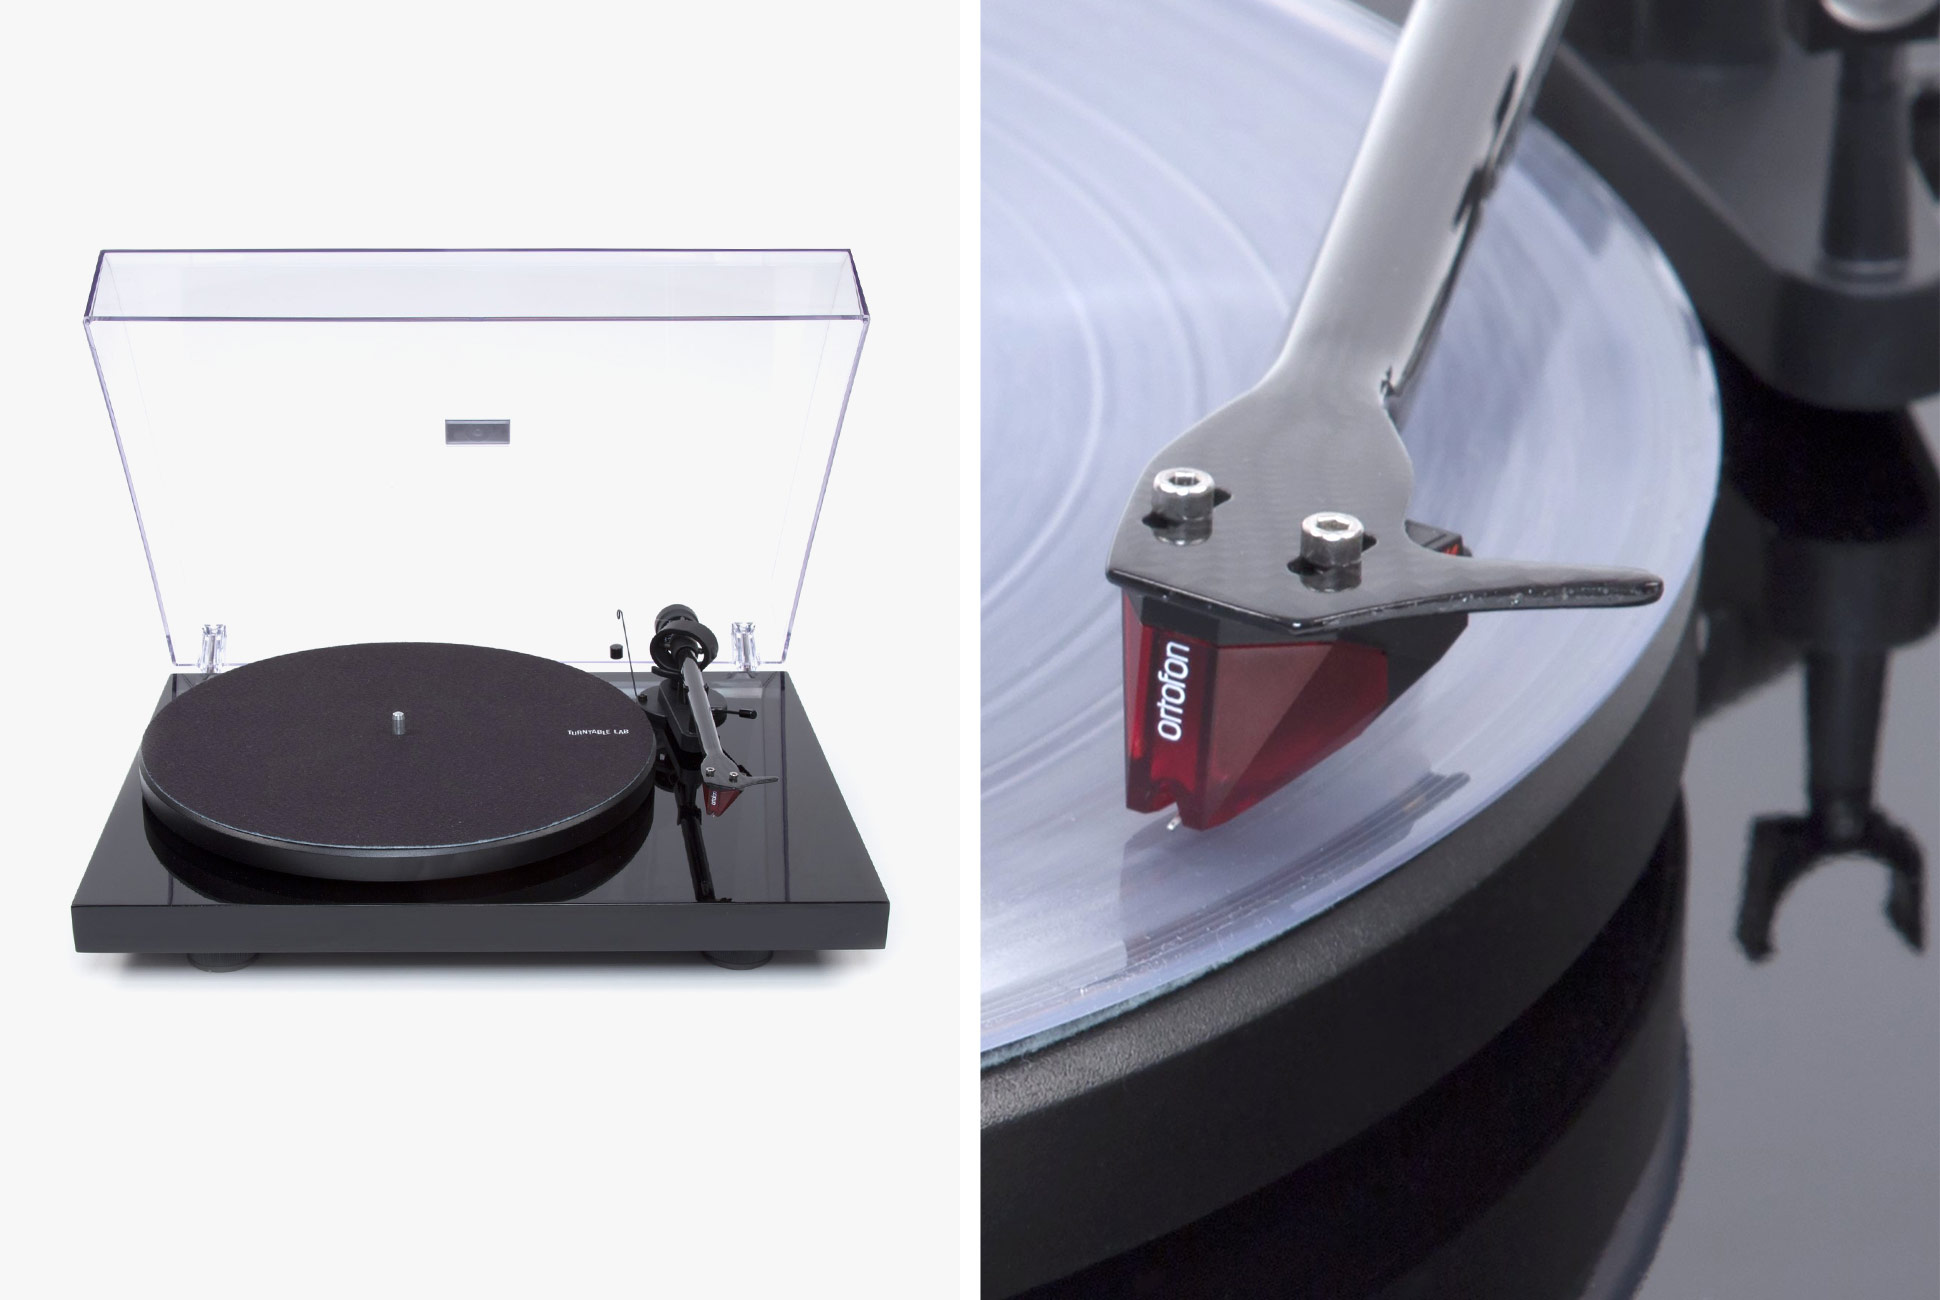 Why You Shouldn’t Buy an All-In-One Turntable